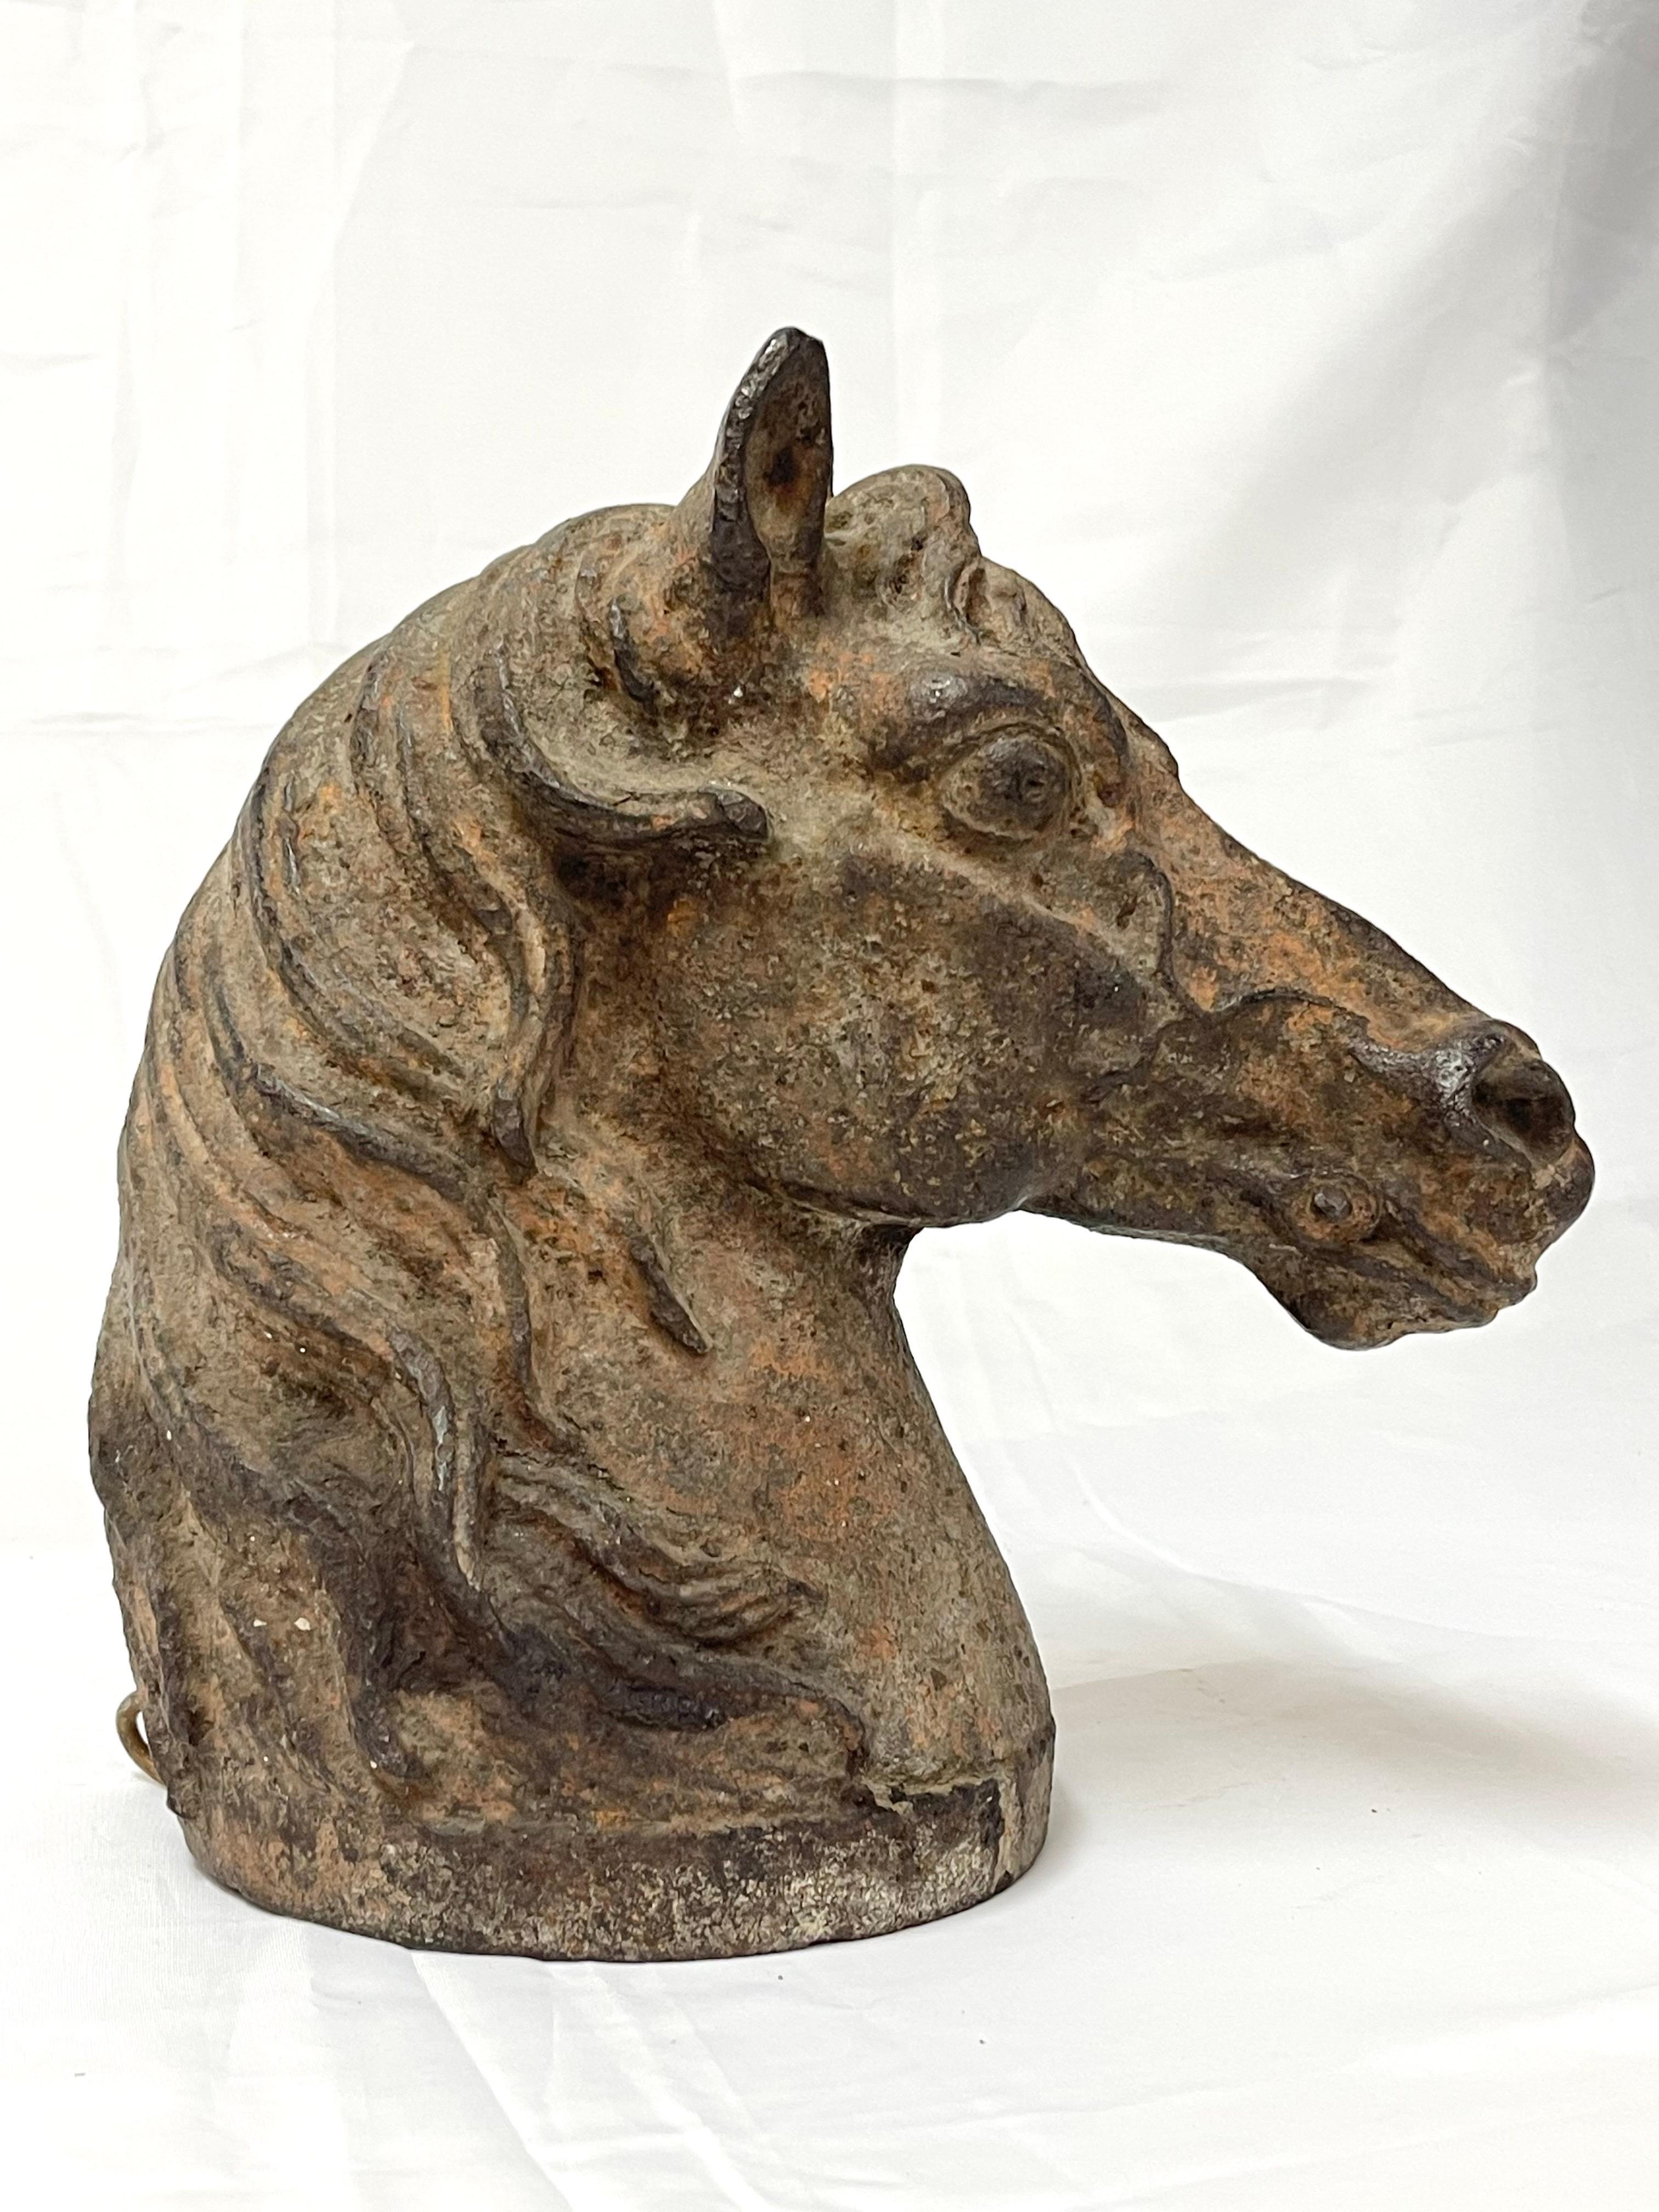 Antique Cast Iron Horse Head. Originally may have been mounted on a hitching post. Weathered and lovely rusted patina. Hollow but very heavy.